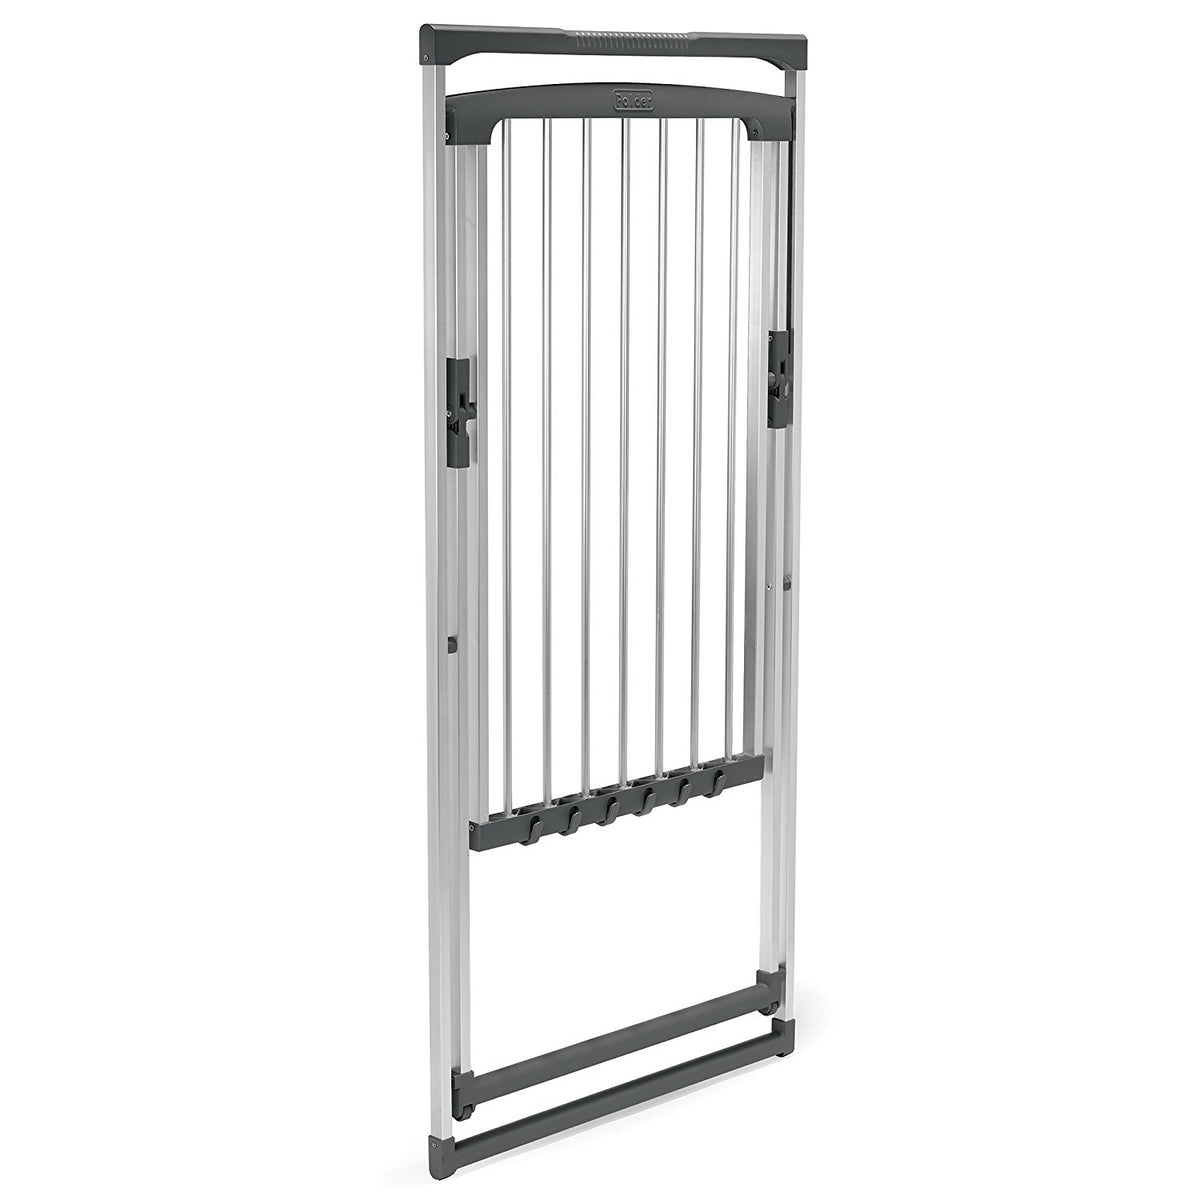 buy drying racks at cheap rate in bulk. wholesale & retail laundry products & supplies store.